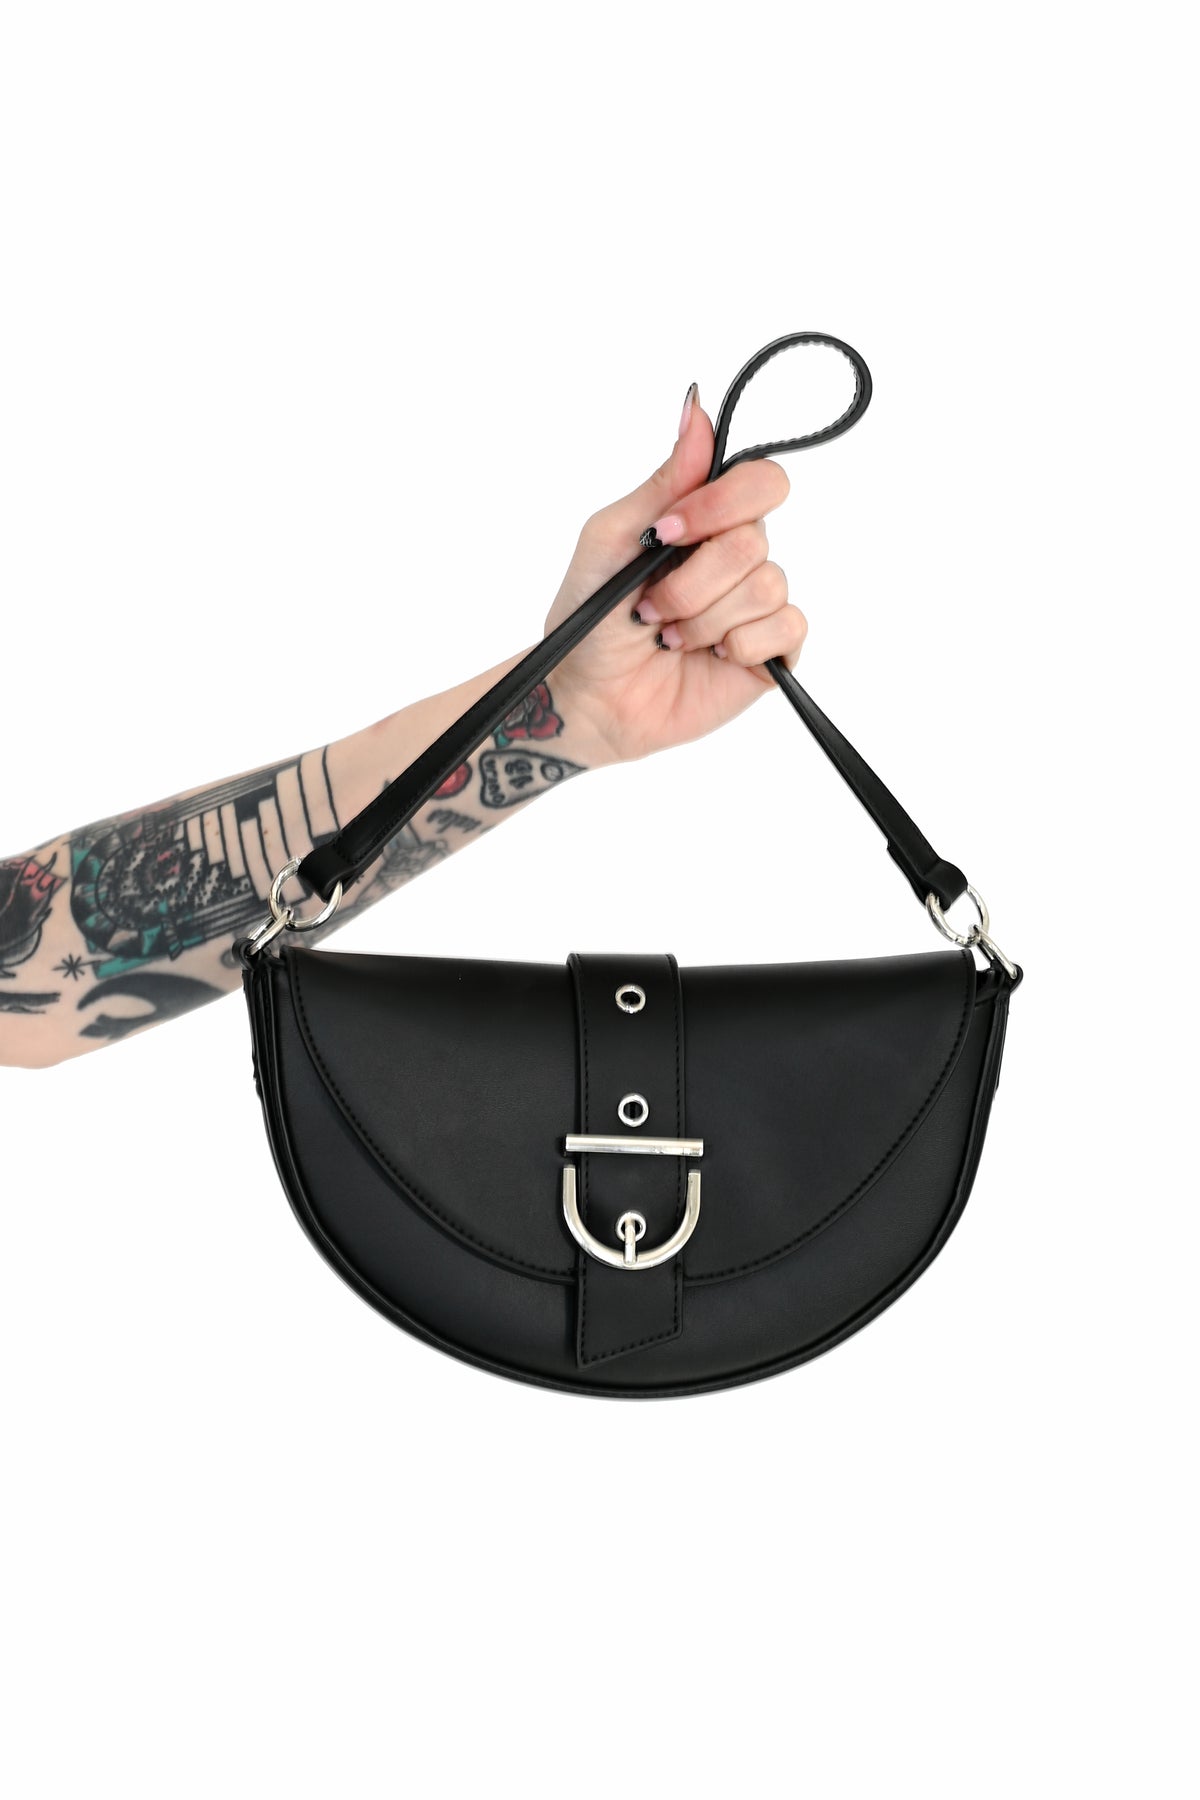 Black faux leather crescent shoulder purse with silver front buckle detail